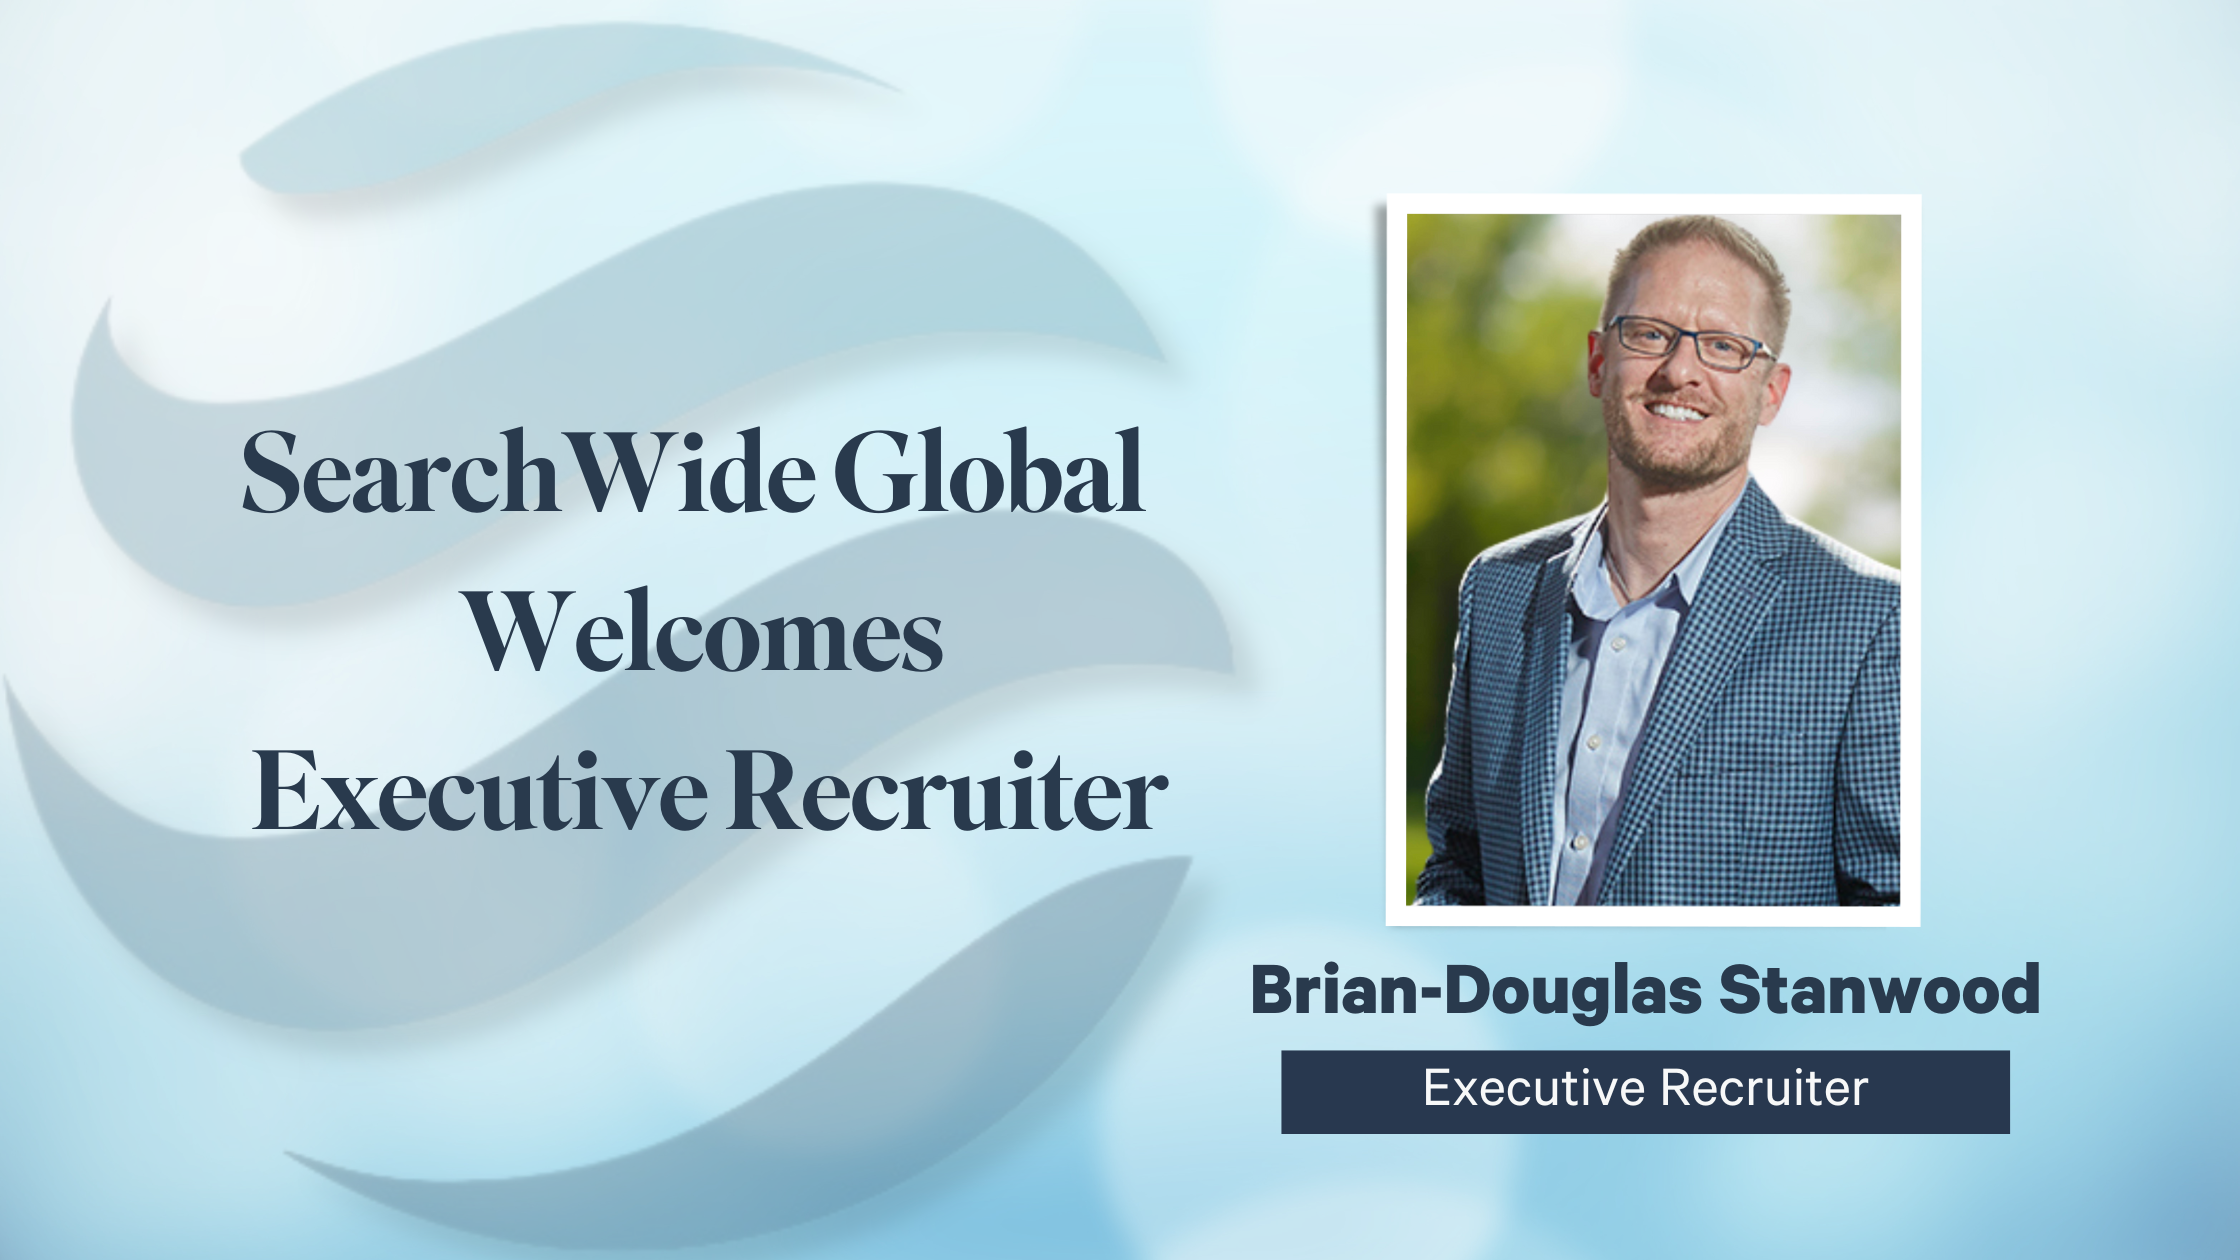 SearchWide Global Welcomes Executive Recruiter